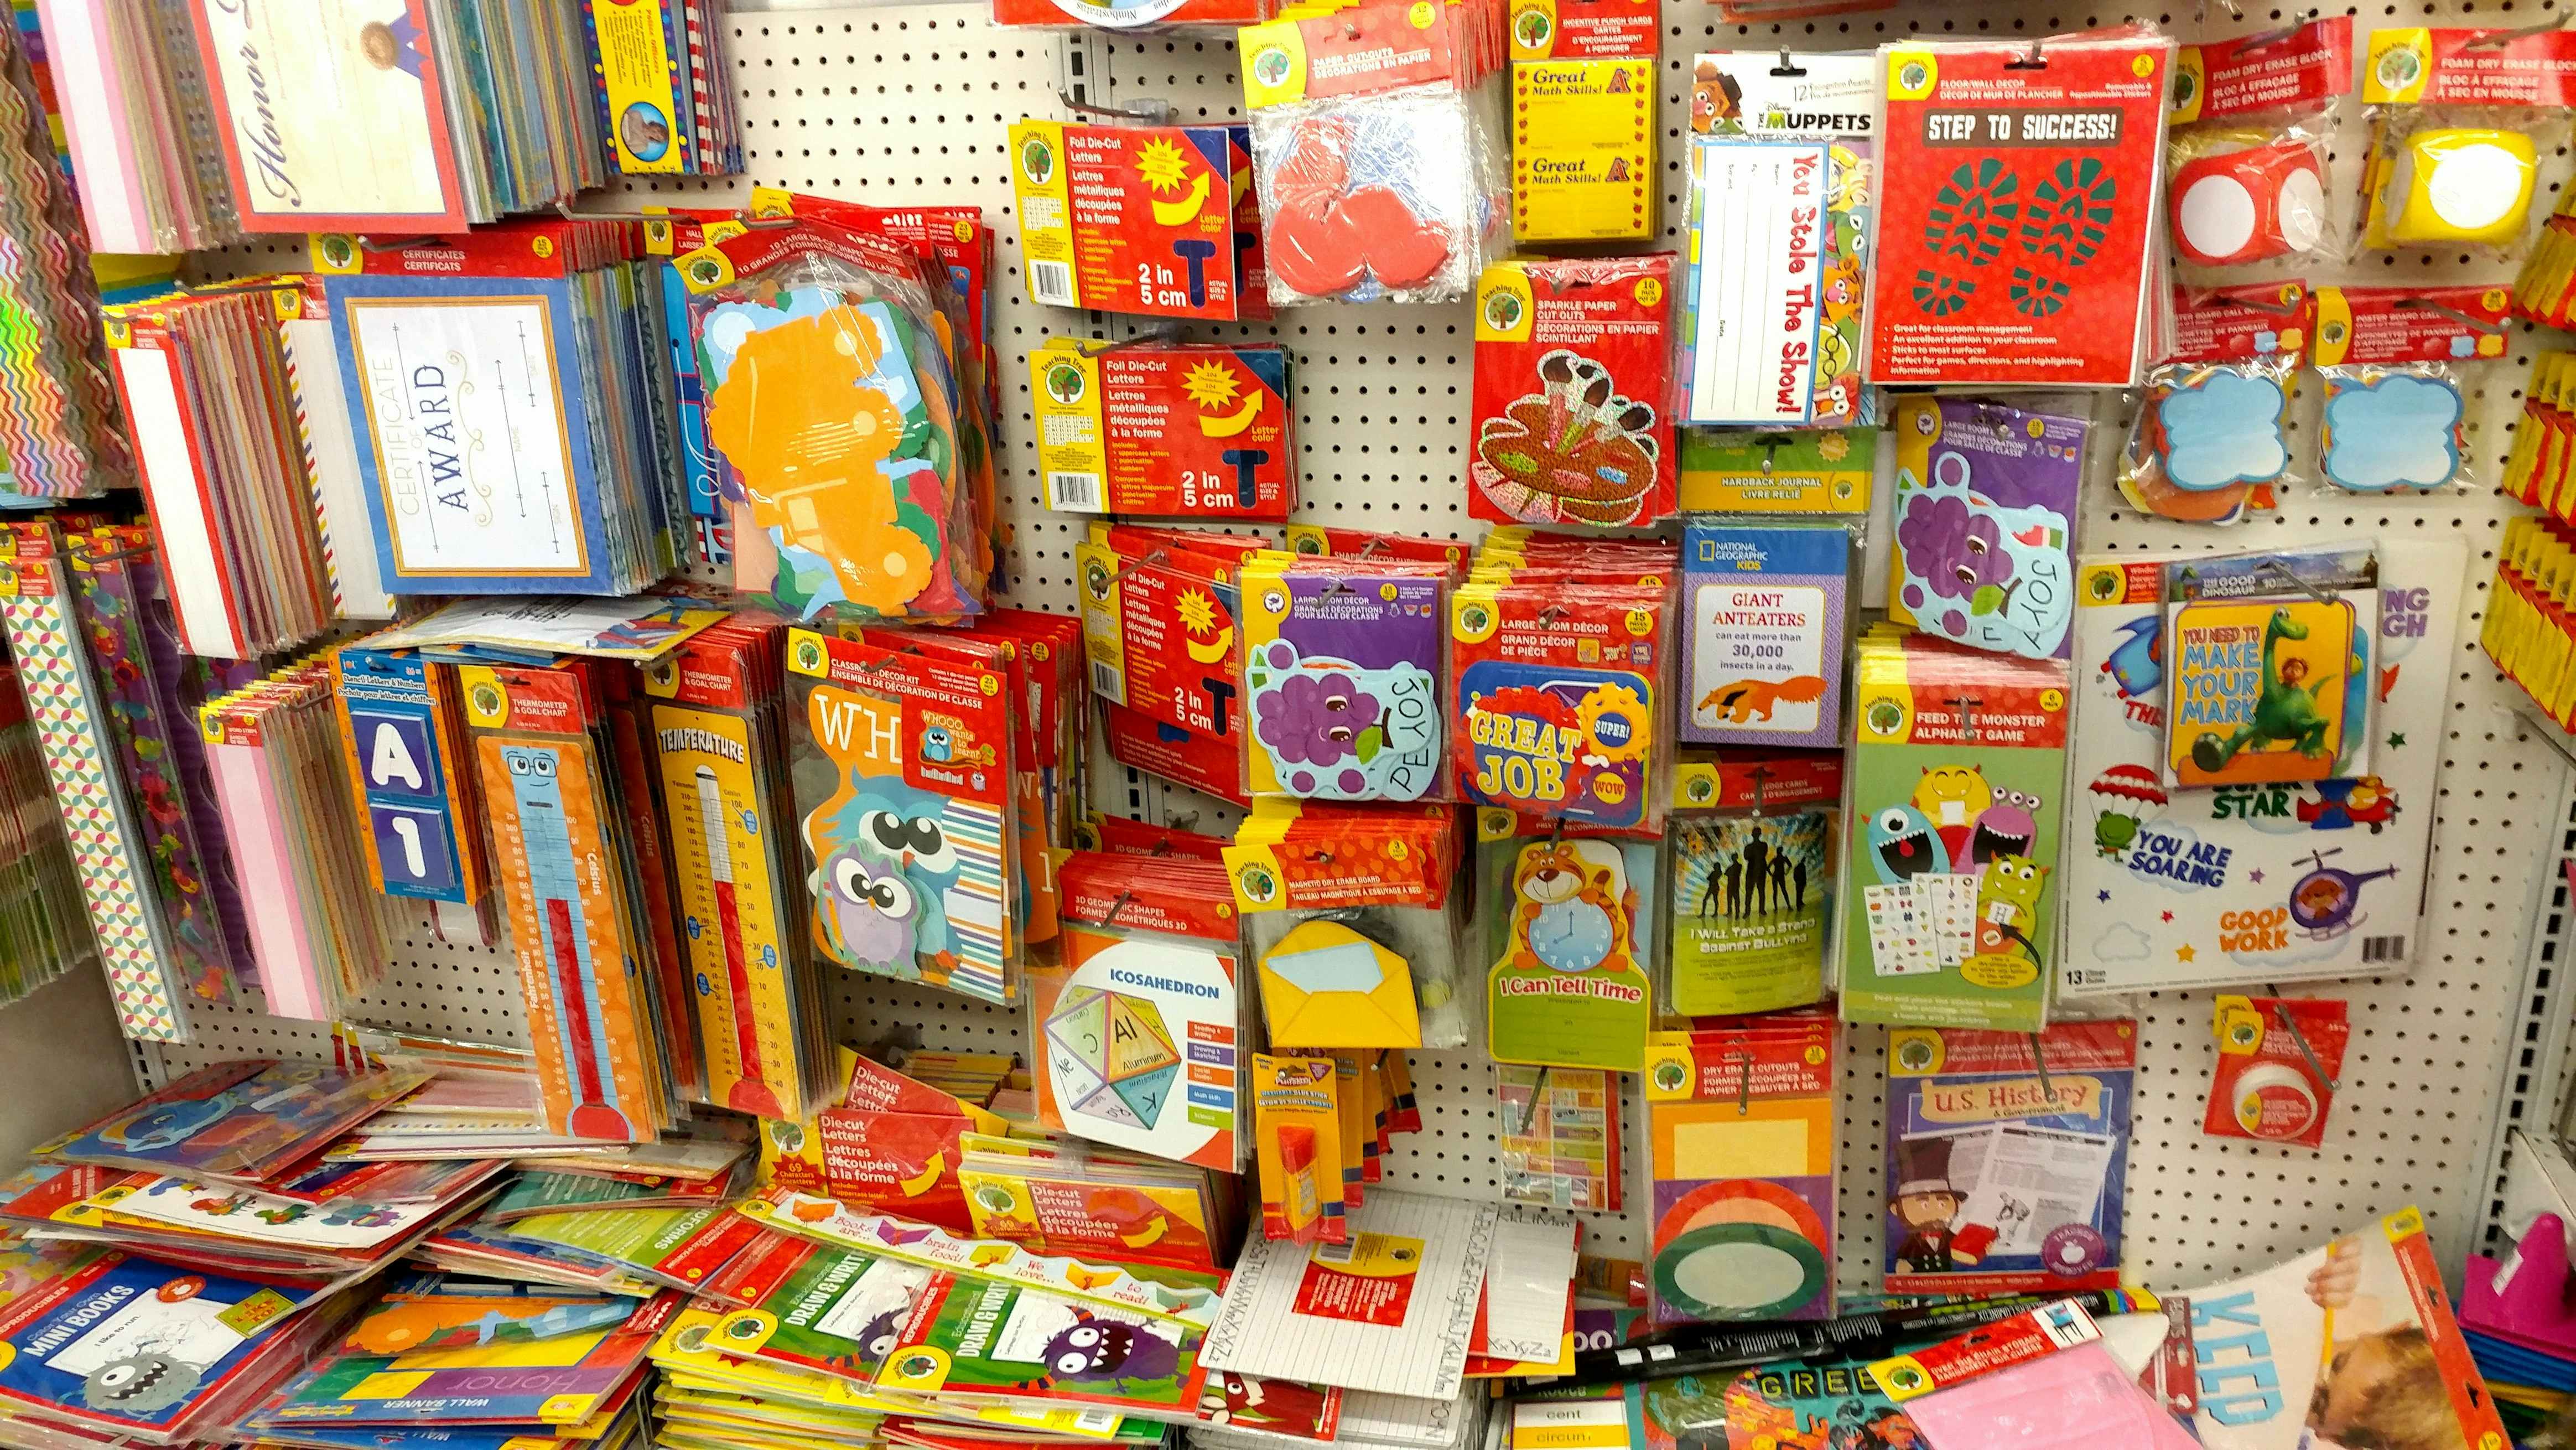 A display of classroom decor and teacher supplies for sale at Dollar Tree.